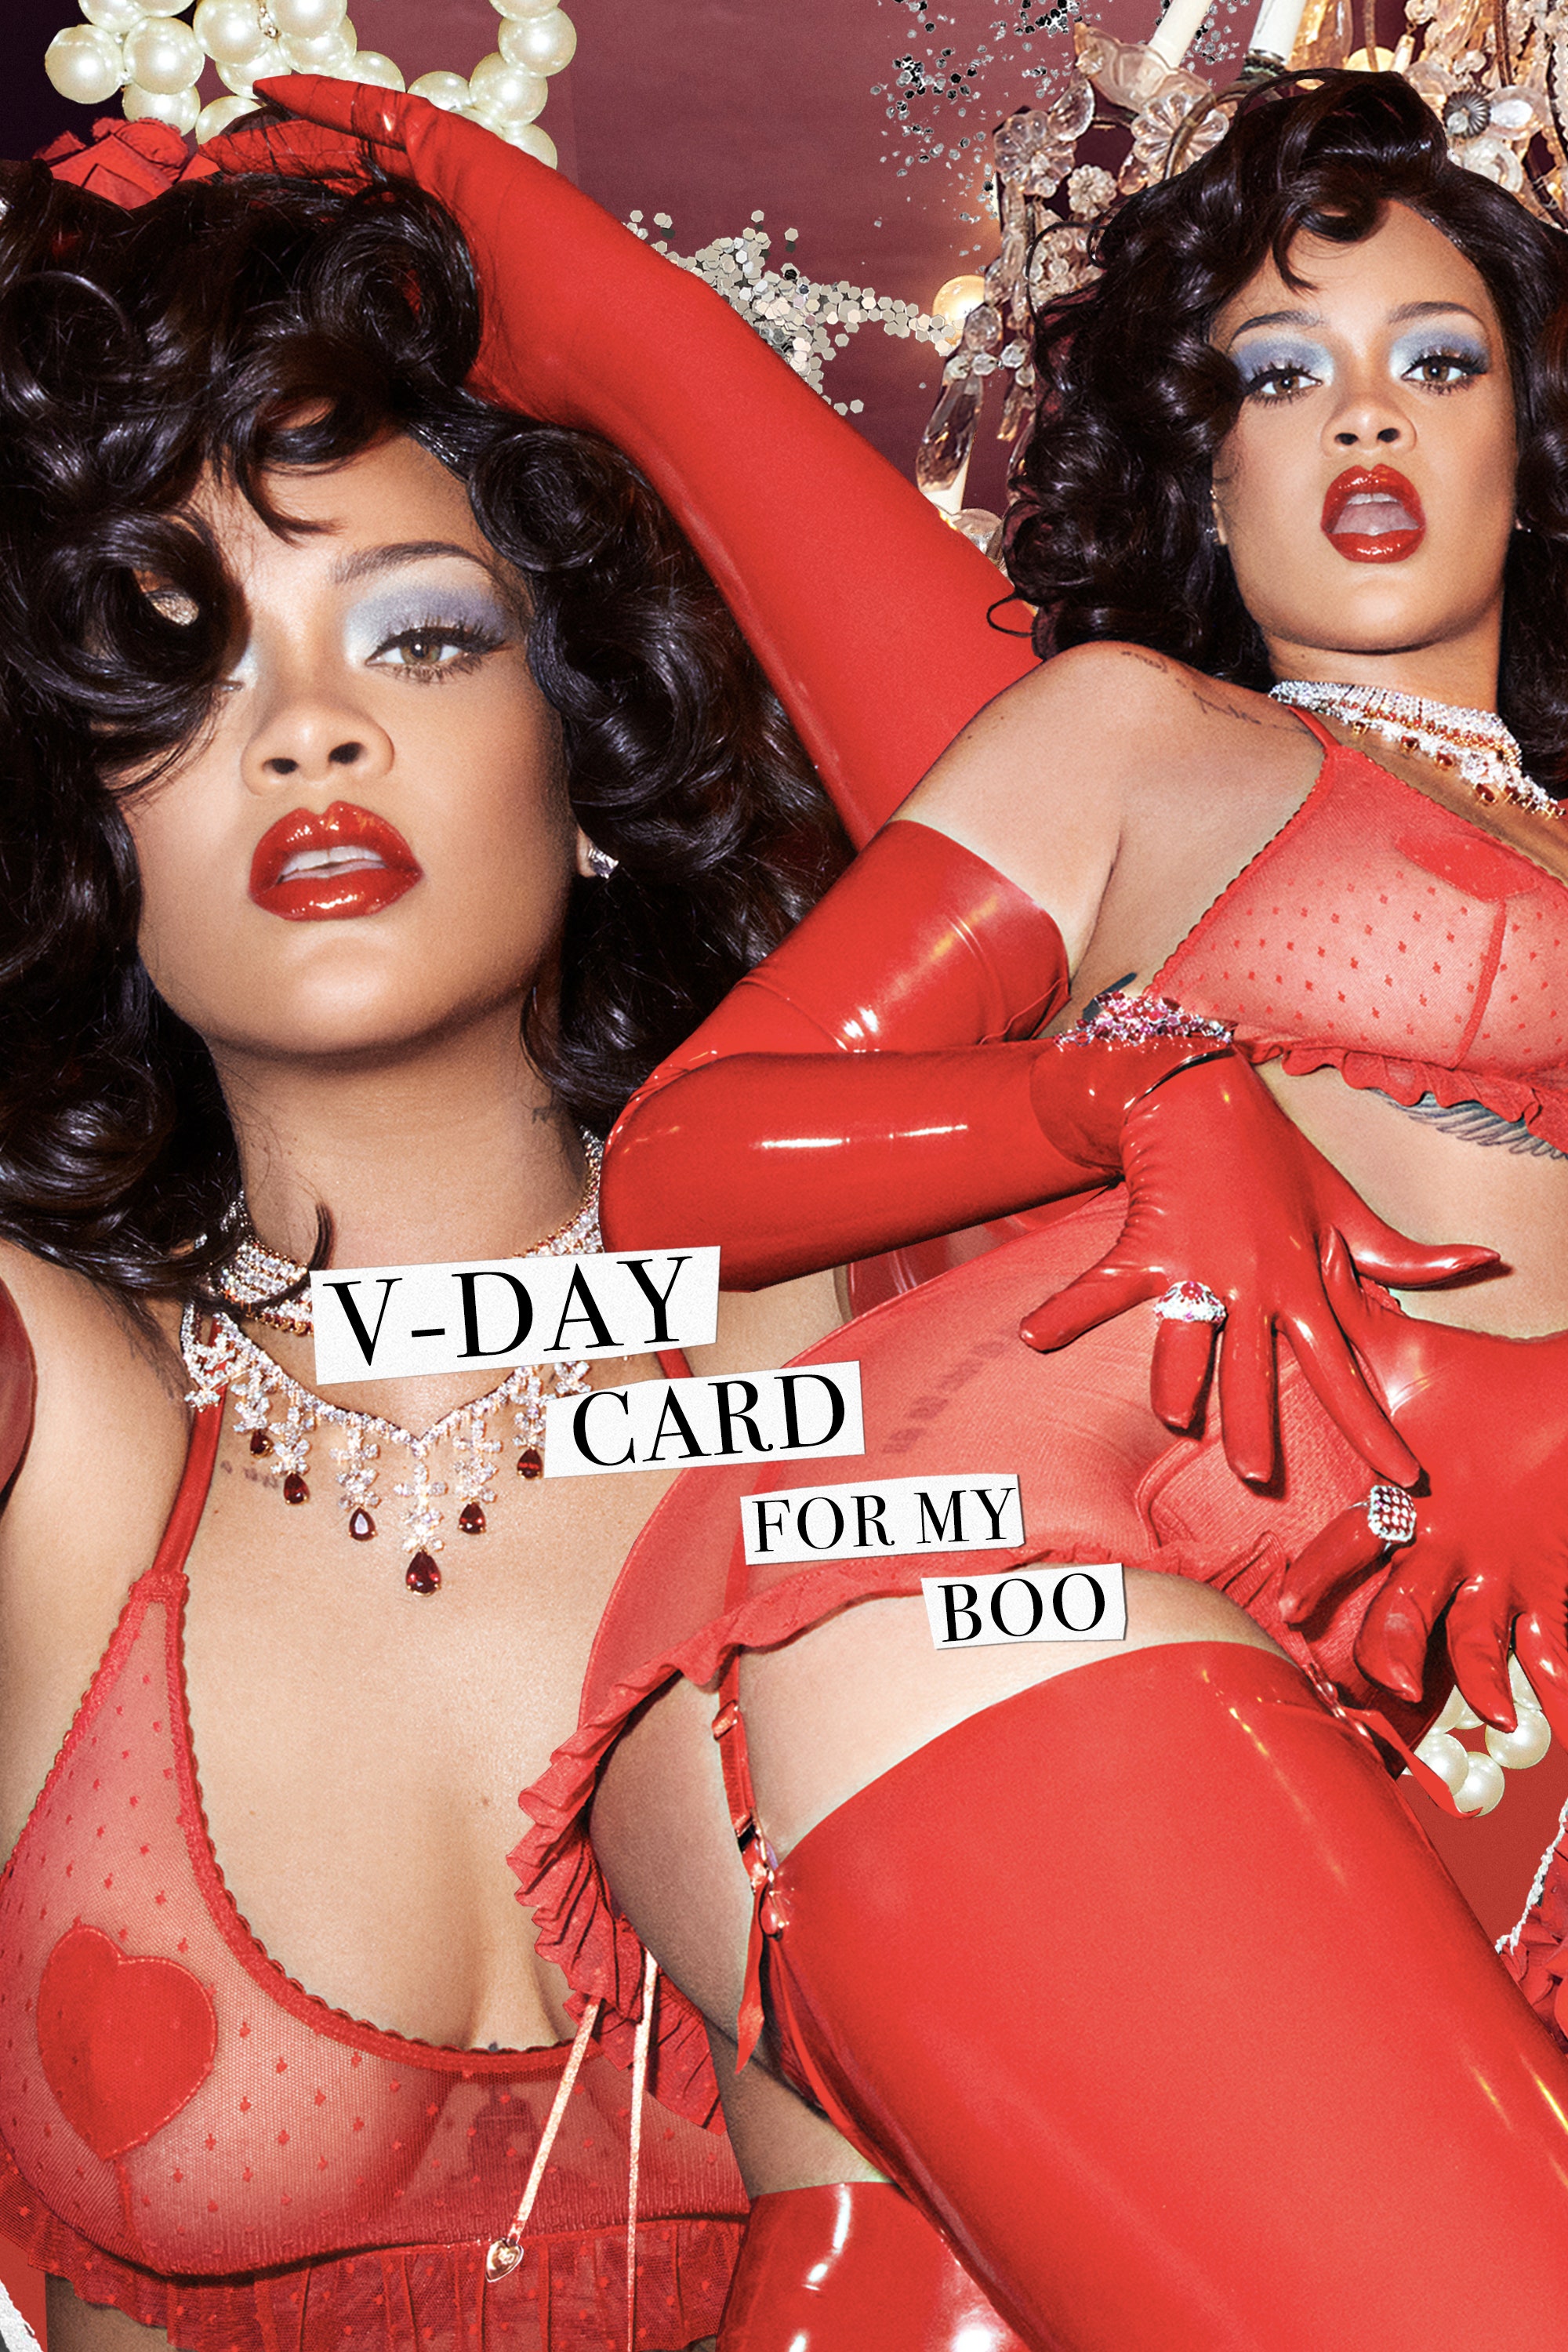 Photos n°5 : Rihanna Wants To Be Your Valentine!